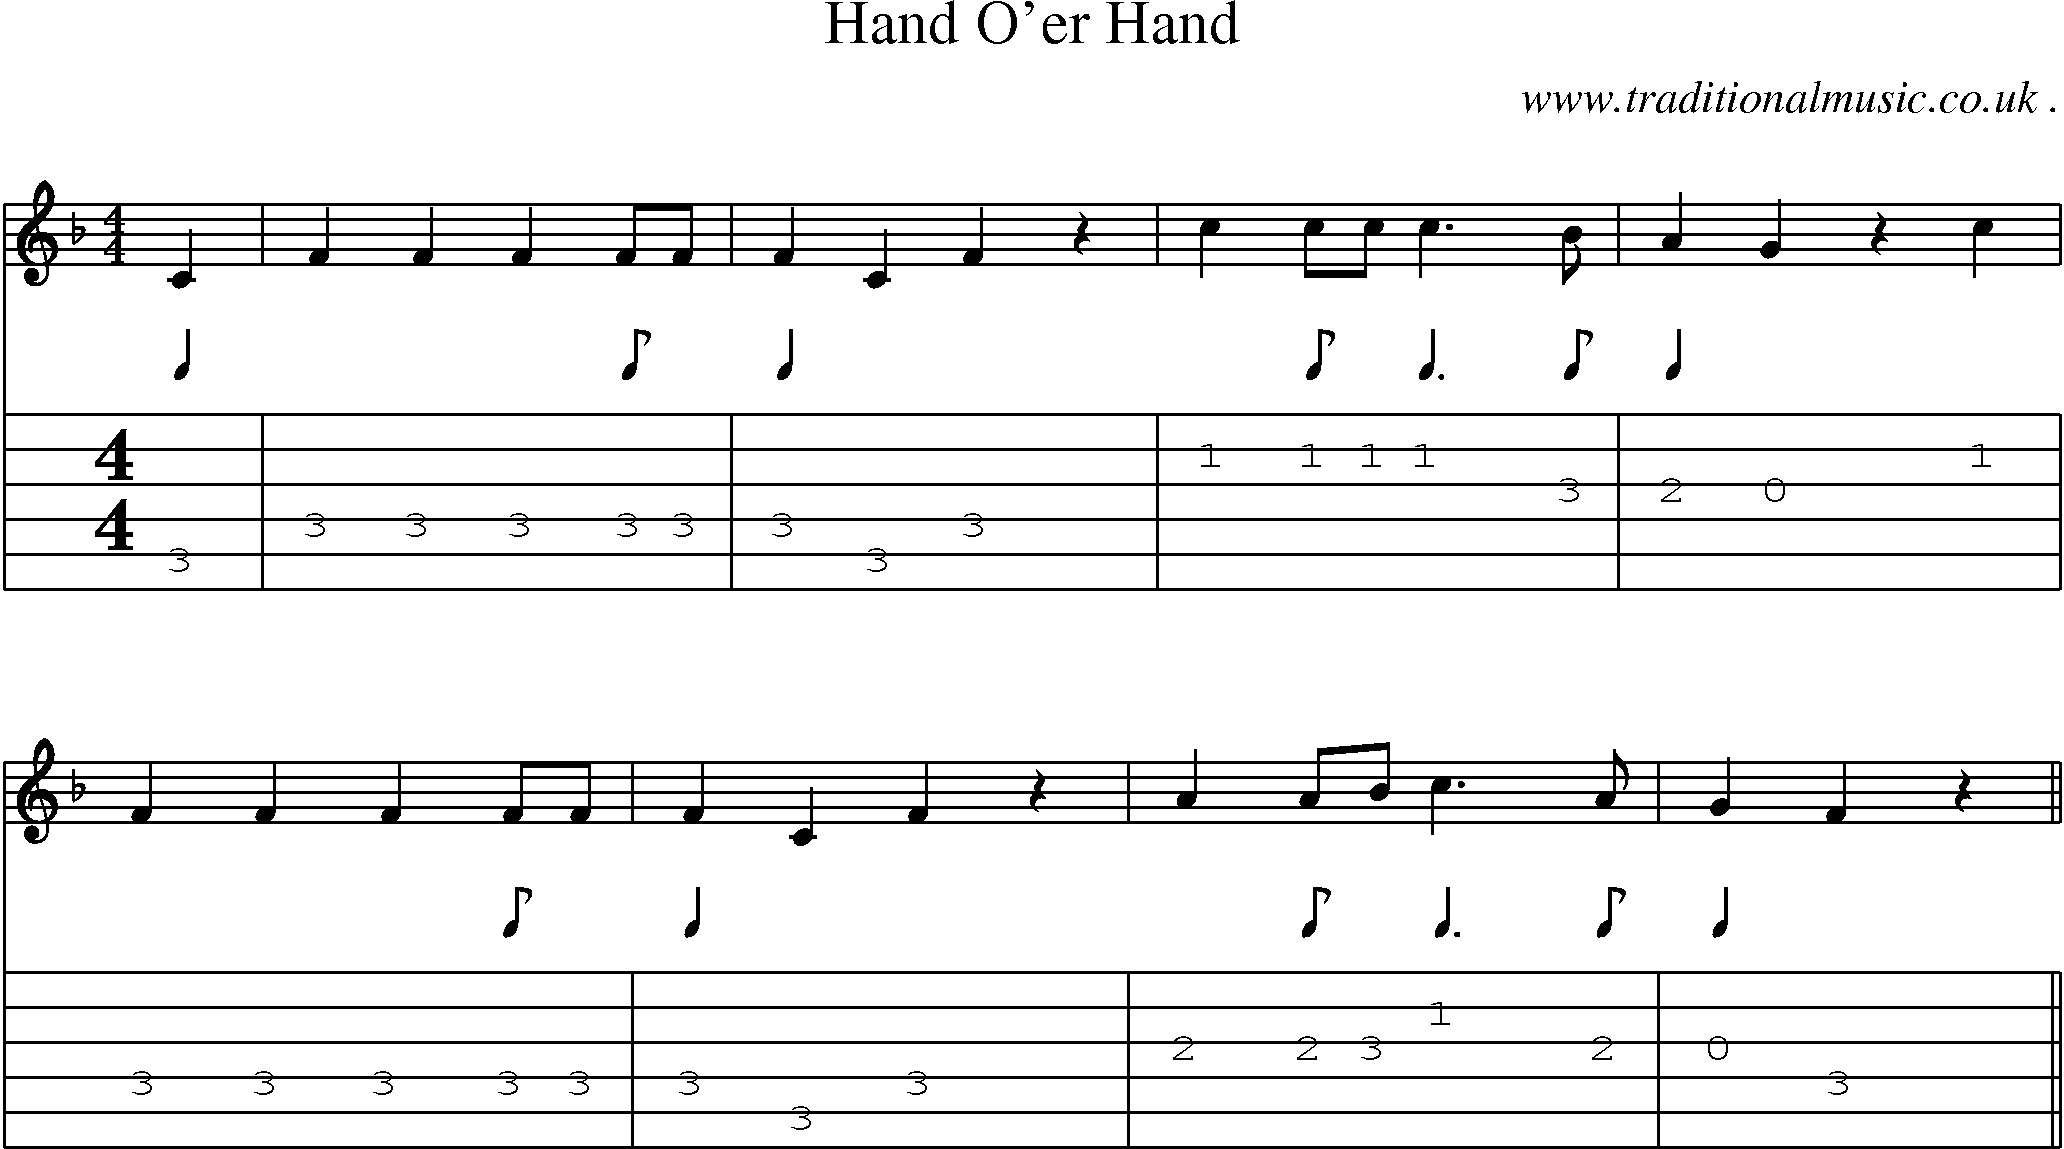 Sheet-Music and Guitar Tabs for Hand Oer Hand